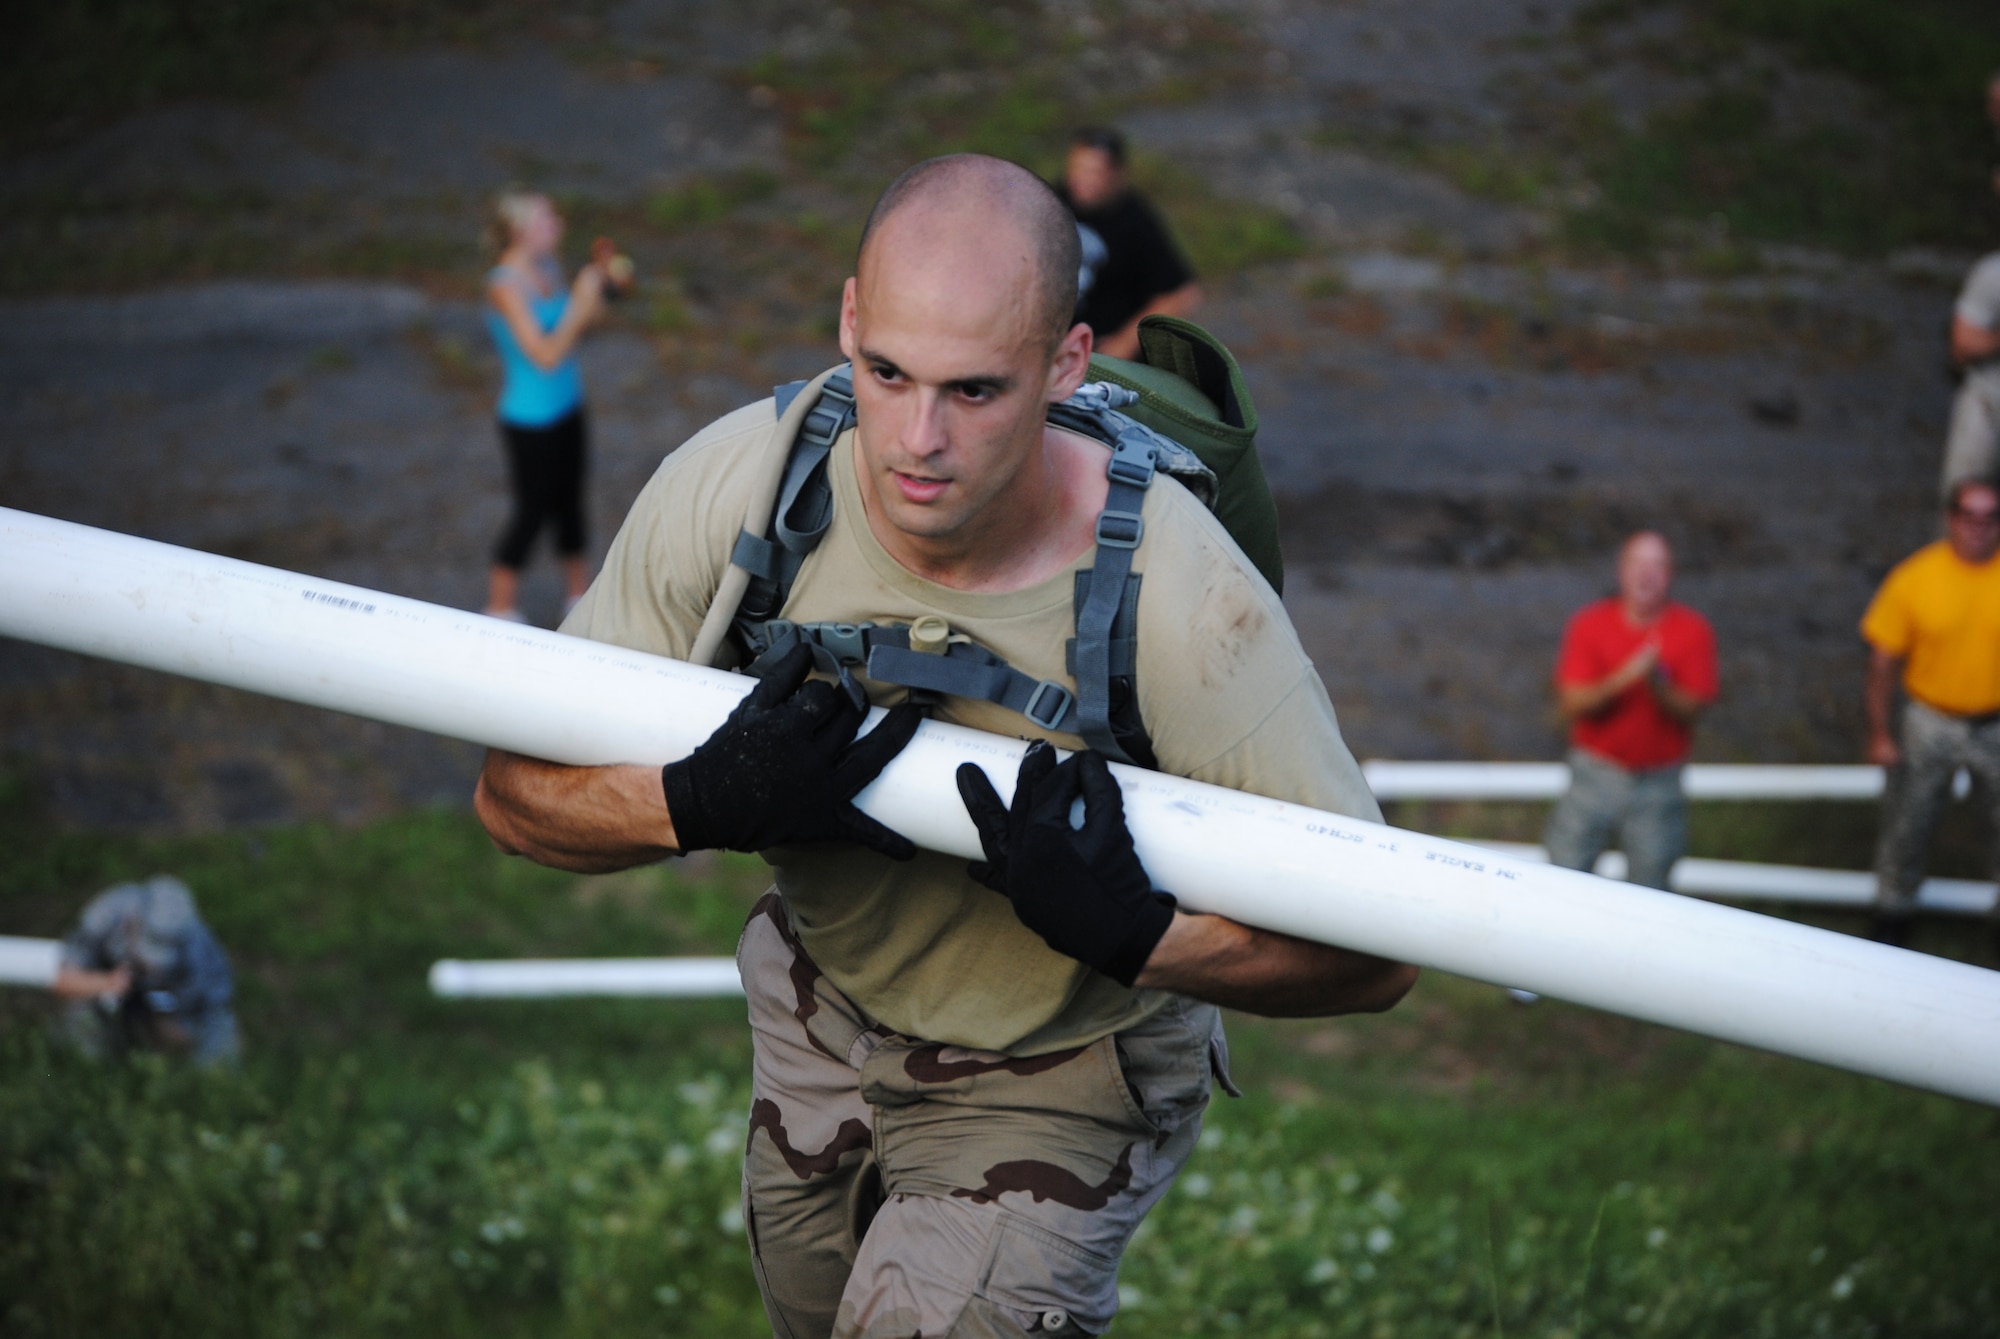 Staff Sgt. Dedrick Baublitz from the 103rd Security Forces Squadron cradles a water-filled PVC pipe up a hill as a member of the Connecticut Air National Guard Emergency Service Team during the Connecticut SWAT Challenge physical fitness test in West Hartford, Aug. 26, 2010. The Guard team took 20th place overall and 10th place in the physical fitness challenge. (Photo courtesy of Ms. Denise Davis)